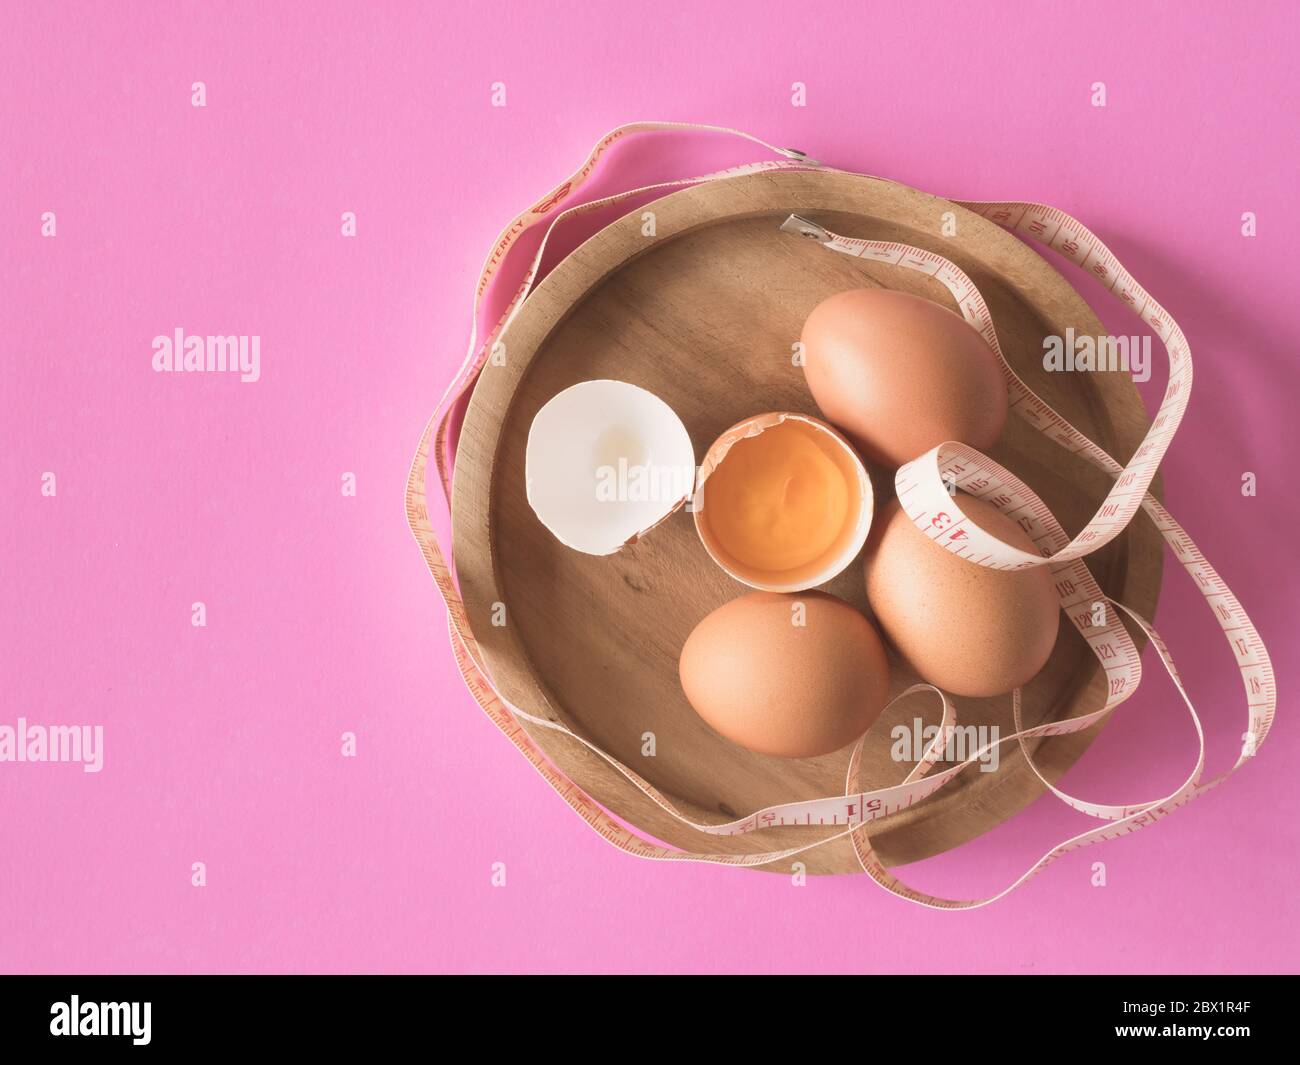 https://c8.alamy.com/comp/2BX1R4F/eggs-with-tape-measure-on-pink-background-2BX1R4F.jpg